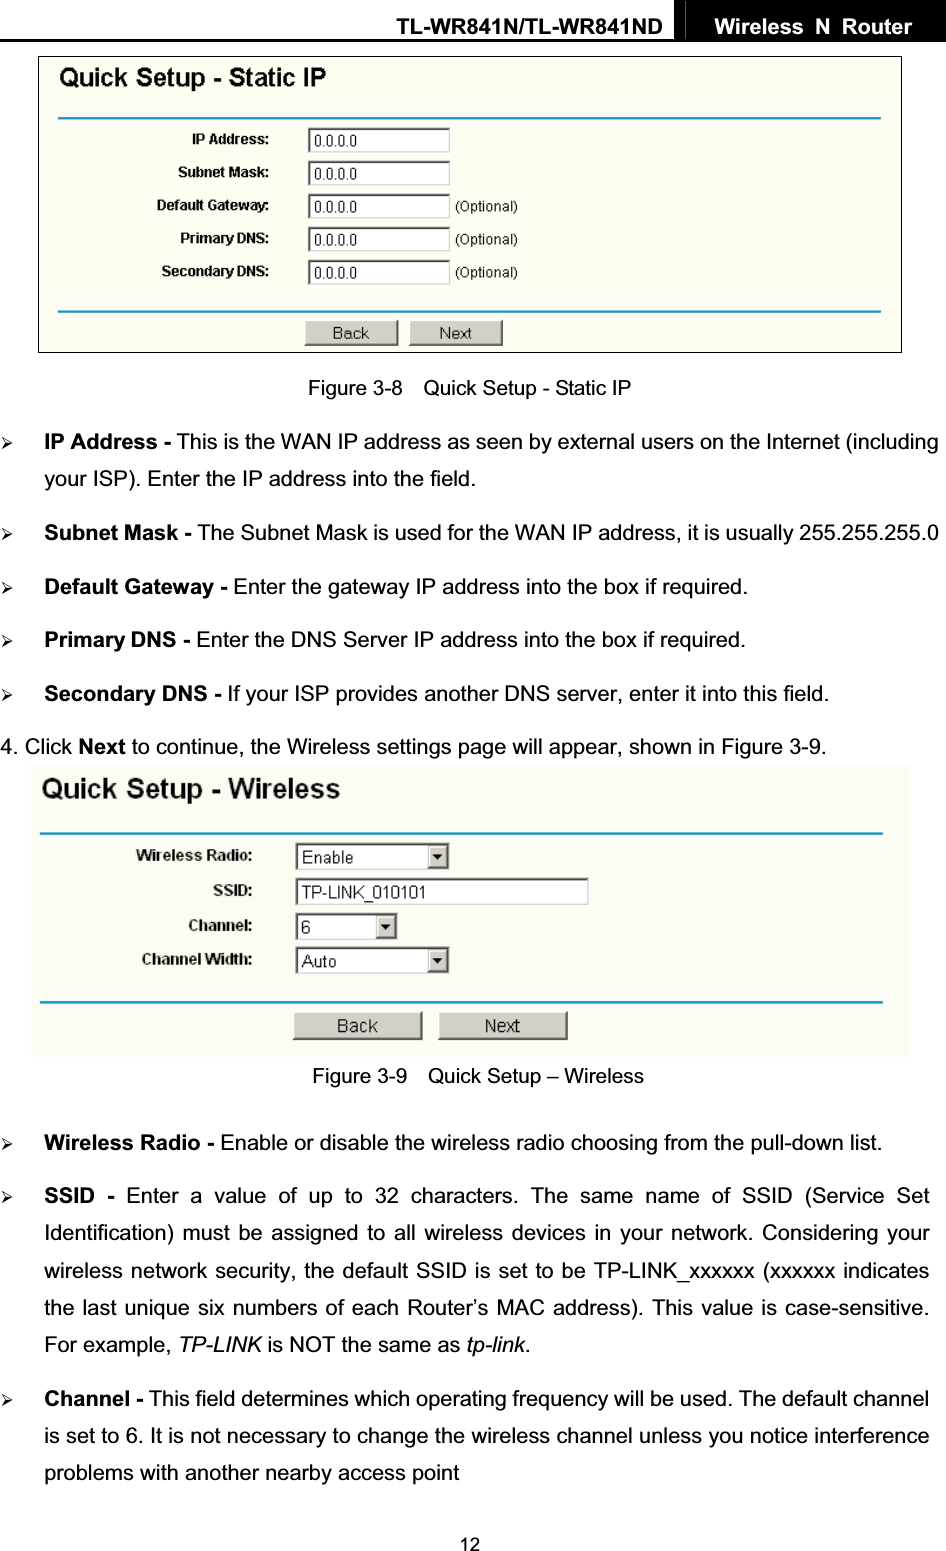 TL-WR841N/TL-WR841ND  Wireless N Router  12Figure 3-8    Quick Setup - Static IP ¾IP Address - This is the WAN IP address as seen by external users on the Internet (including your ISP). Enter the IP address into the field. ¾Subnet Mask - The Subnet Mask is used for the WAN IP address, it is usually 255.255.255.0 ¾Default Gateway - Enter the gateway IP address into the box if required. ¾Primary DNS - Enter the DNS Server IP address into the box if required. ¾Secondary DNS - If your ISP provides another DNS server, enter it into this field.4. Click Next to continue, the Wireless settings page will appear, shown in Figure 3-9. Figure 3-9    Quick Setup – Wireless ¾Wireless Radio - Enable or disable the wireless radio choosing from the pull-down list. ¾SSID - Enter a value of up to 32 characters. The same name of SSID (Service Set Identification) must be assigned to all wireless devices in your network. Considering your wireless network security, the default SSID is set to be TP-LINK_xxxxxx (xxxxxx indicates the last unique six numbers of each Router’s MAC address). This value is case-sensitive. For example, TP-LINK is NOT the same as tp-link.¾Channel - This field determines which operating frequency will be used. The default channel is set to 6. It is not necessary to change the wireless channel unless you notice interference problems with another nearby access point 